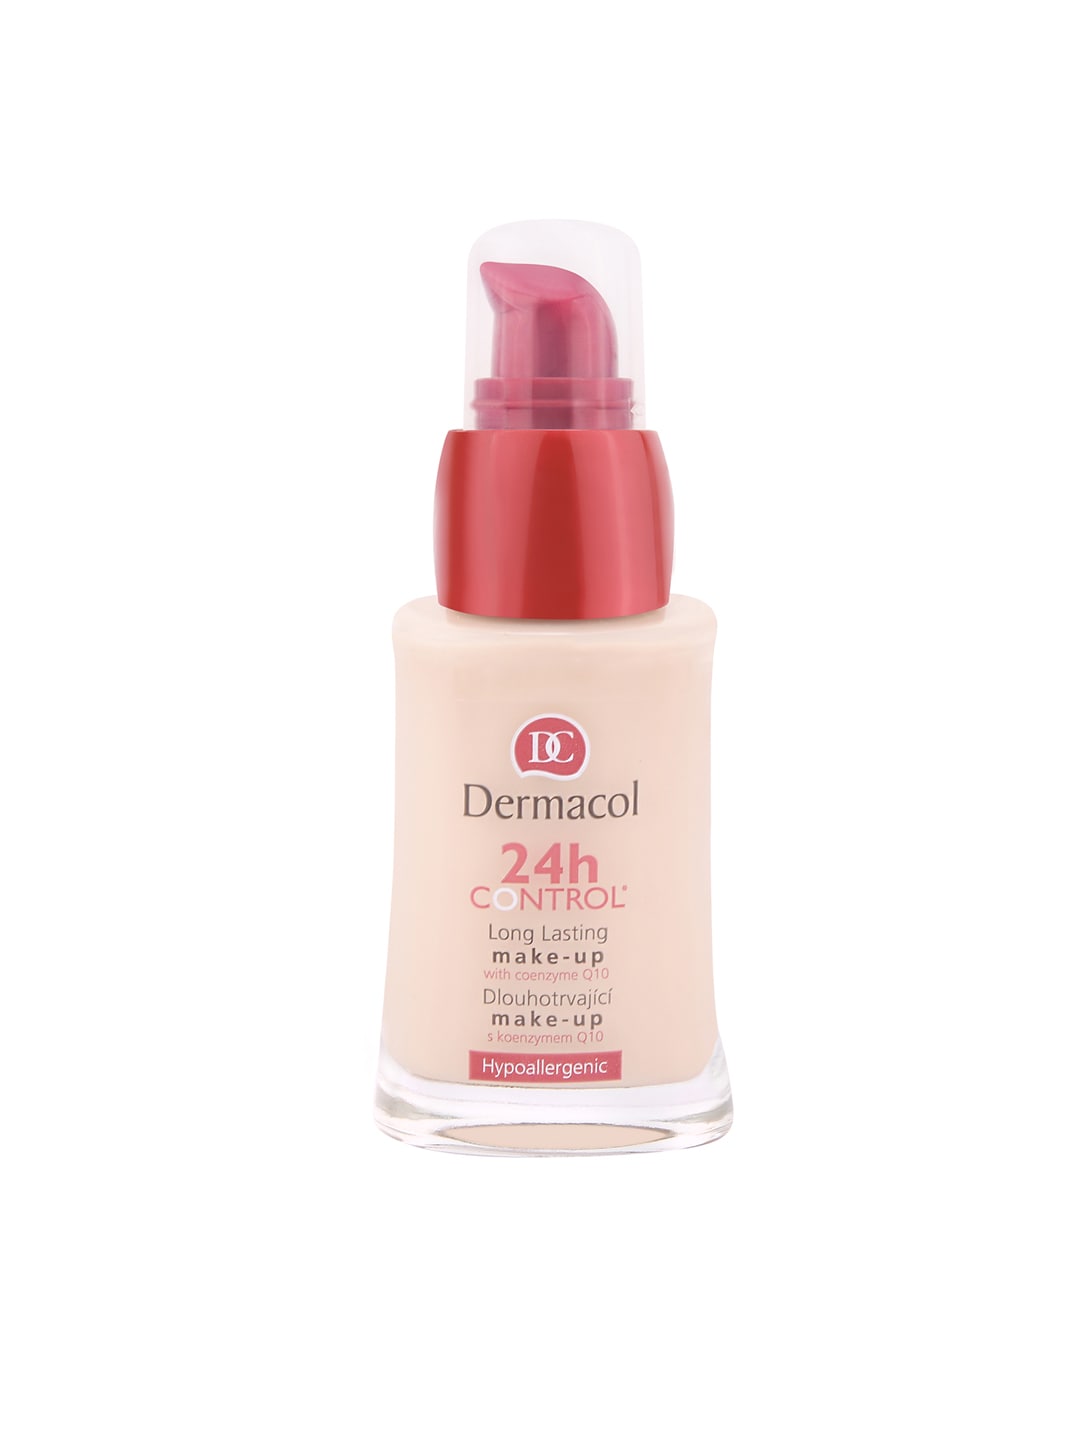 Dermacol 24H Control Make-up Foundation 50 - 30 ml Price in India